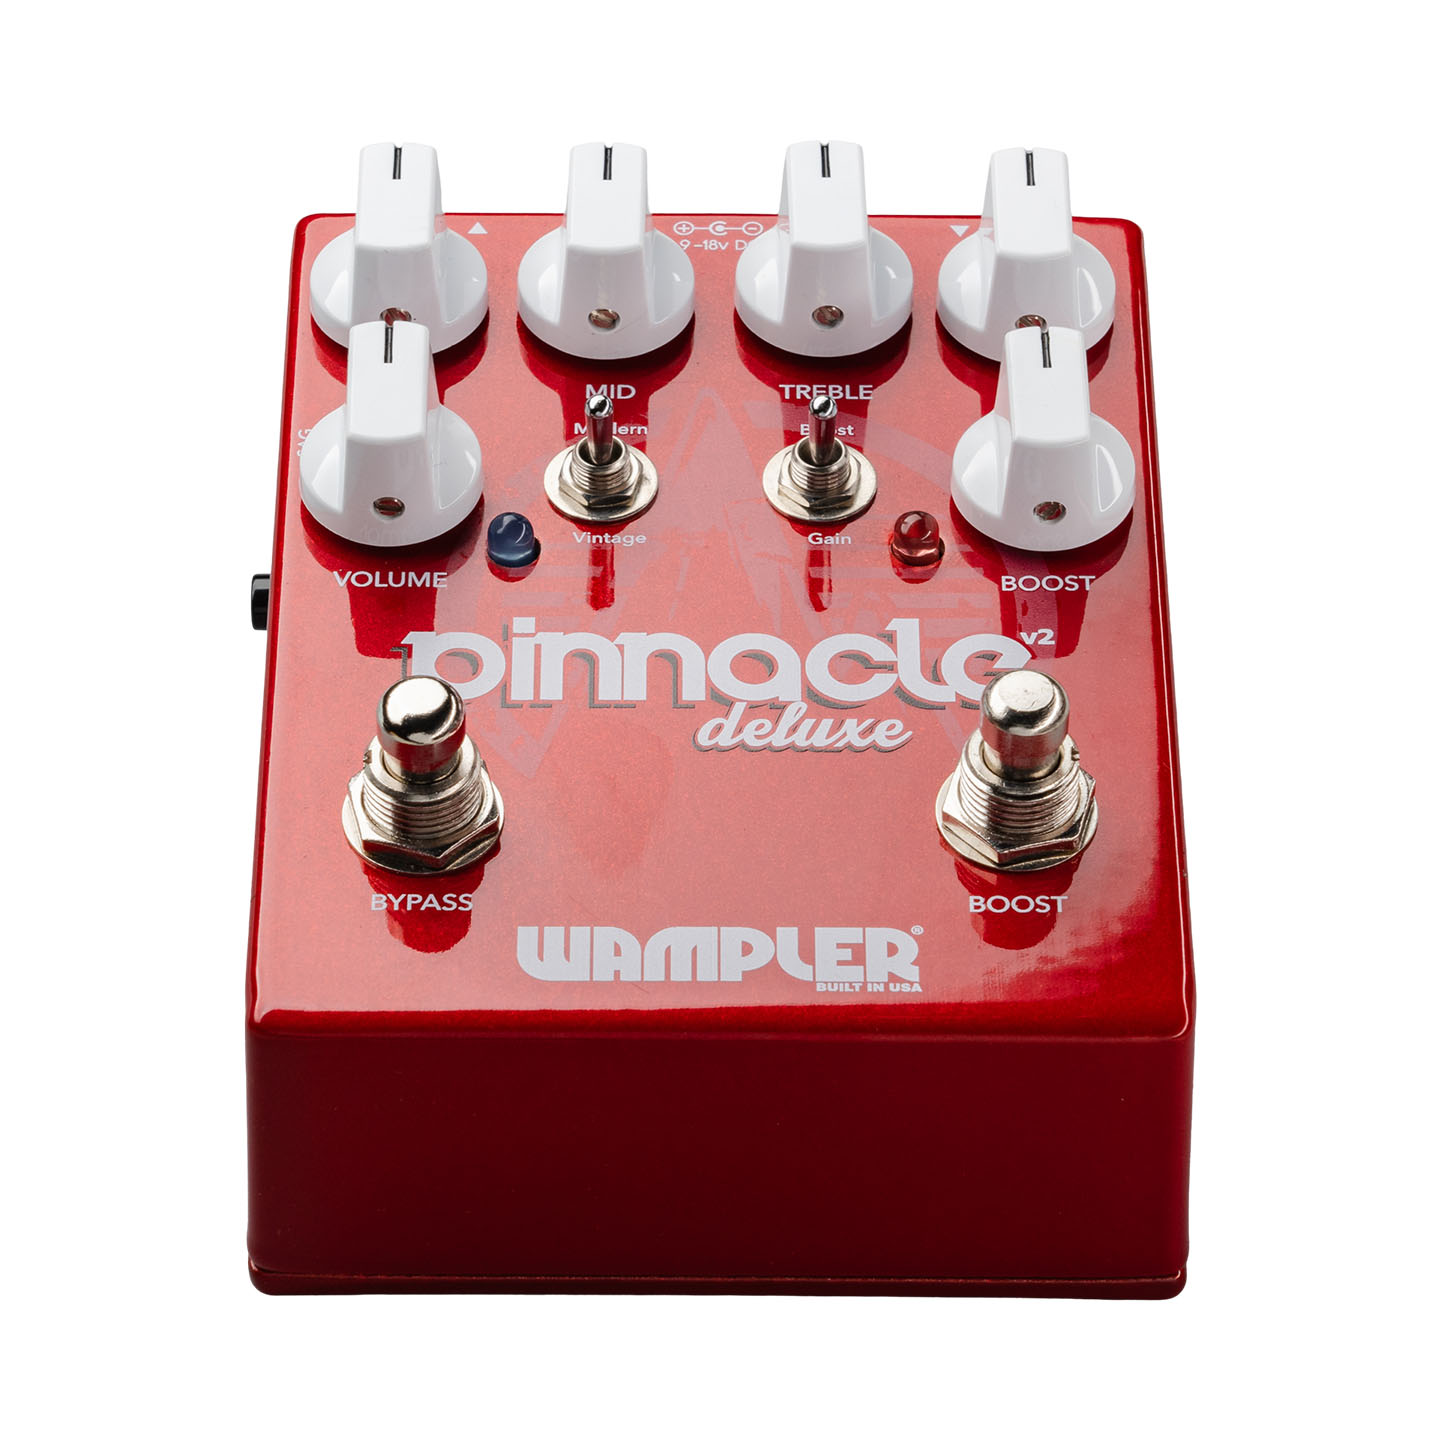 Pinnacle Deluxe v2 Pedal